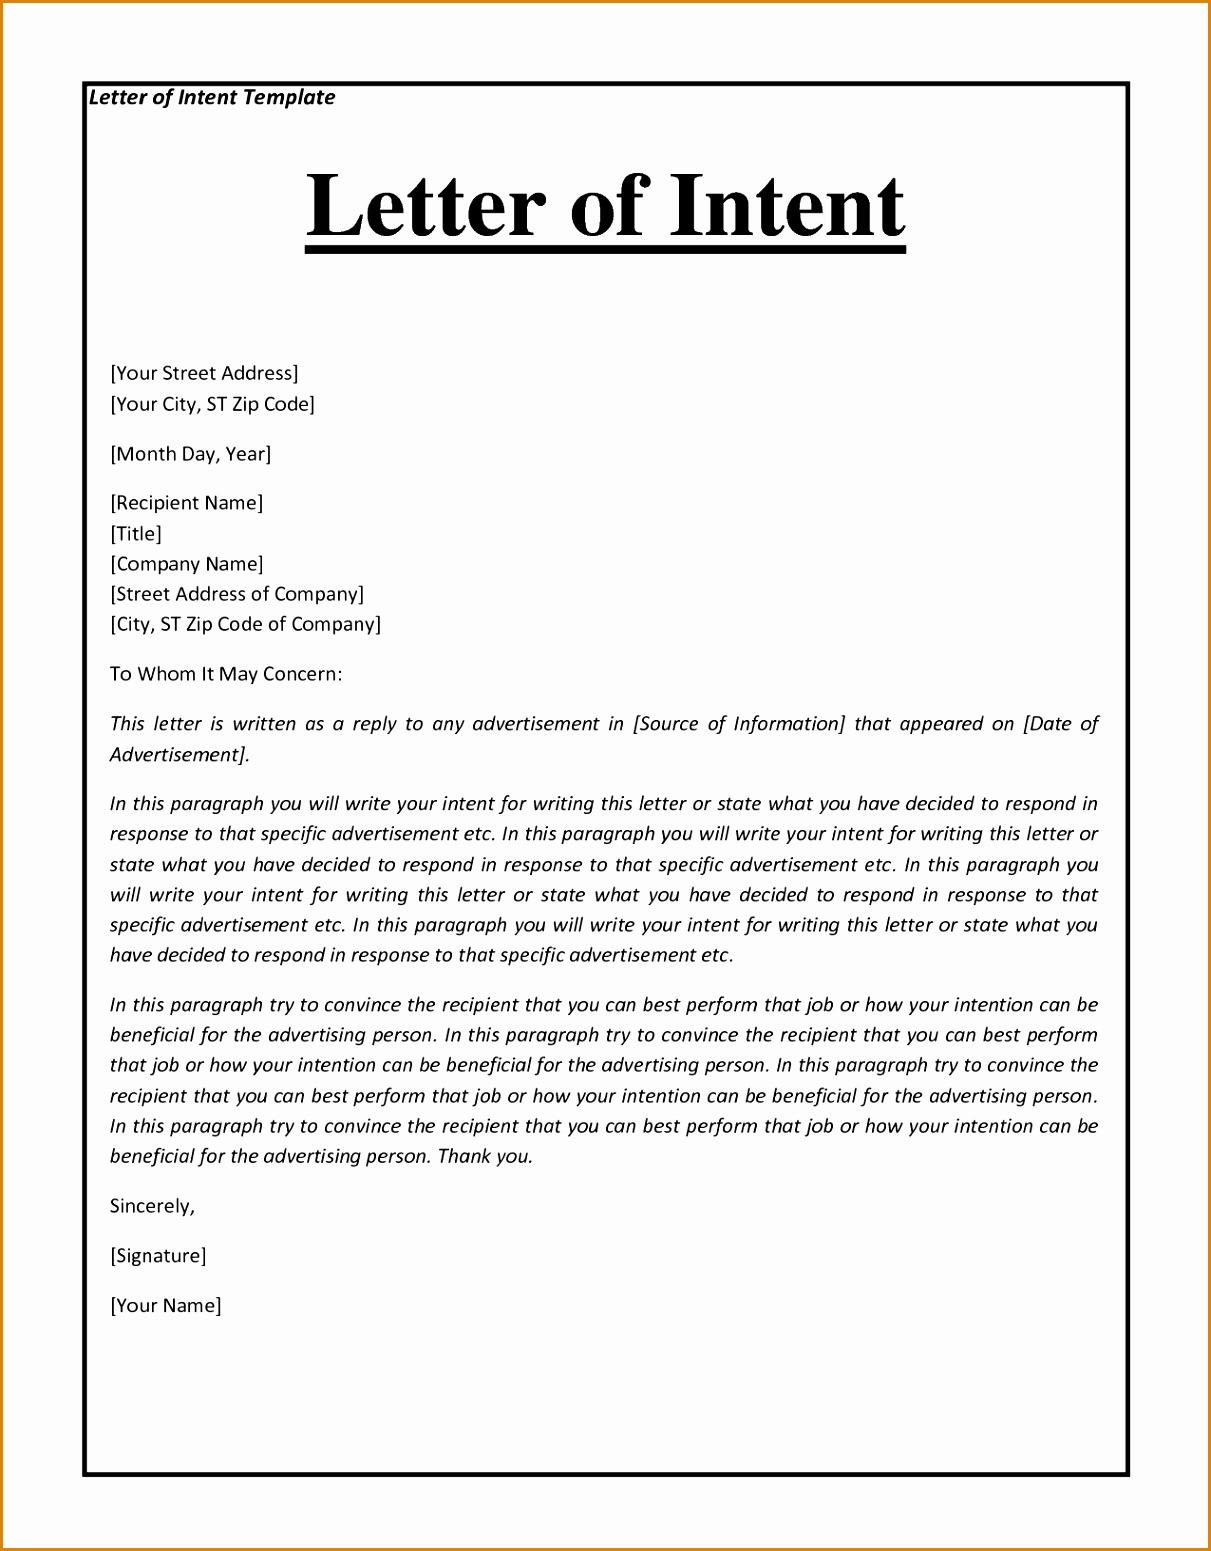 homeschool-letter-of-intent-template-samples-letter-template-collection